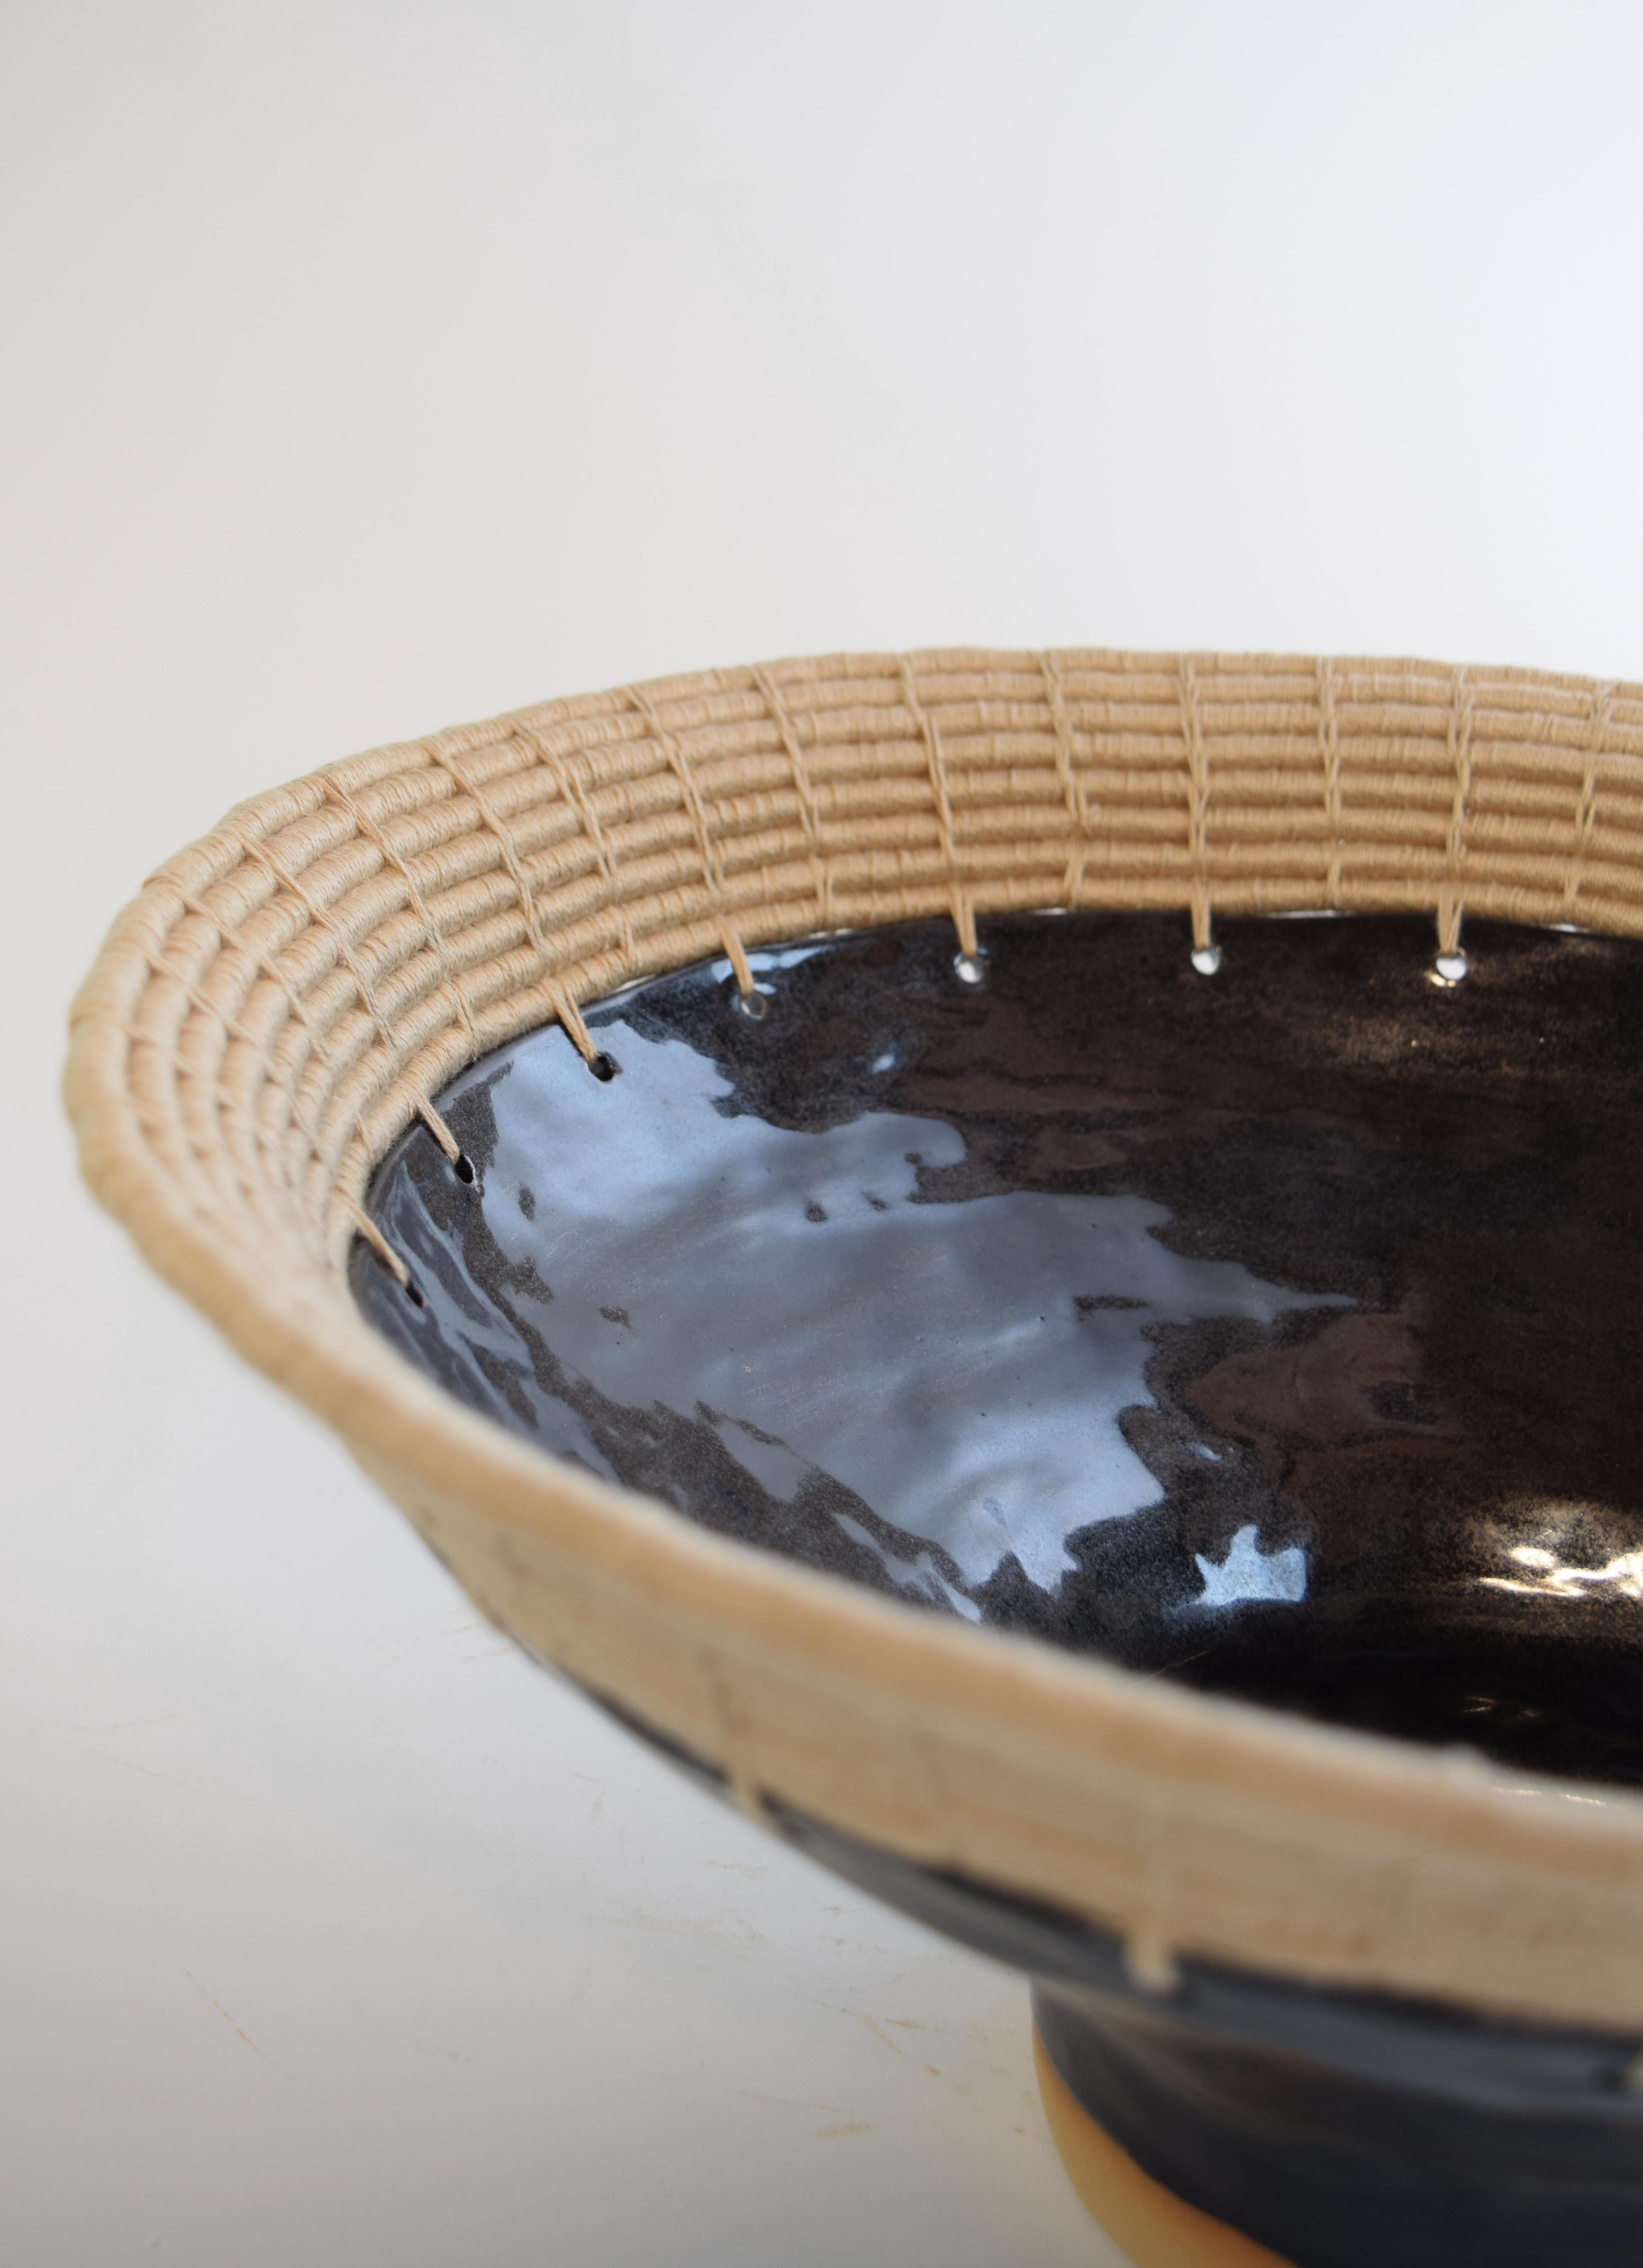 Hand-Crafted One of a Kind Asymmetrical Ceramic Bowl #778, Black Glaze & Tan Woven Cotton